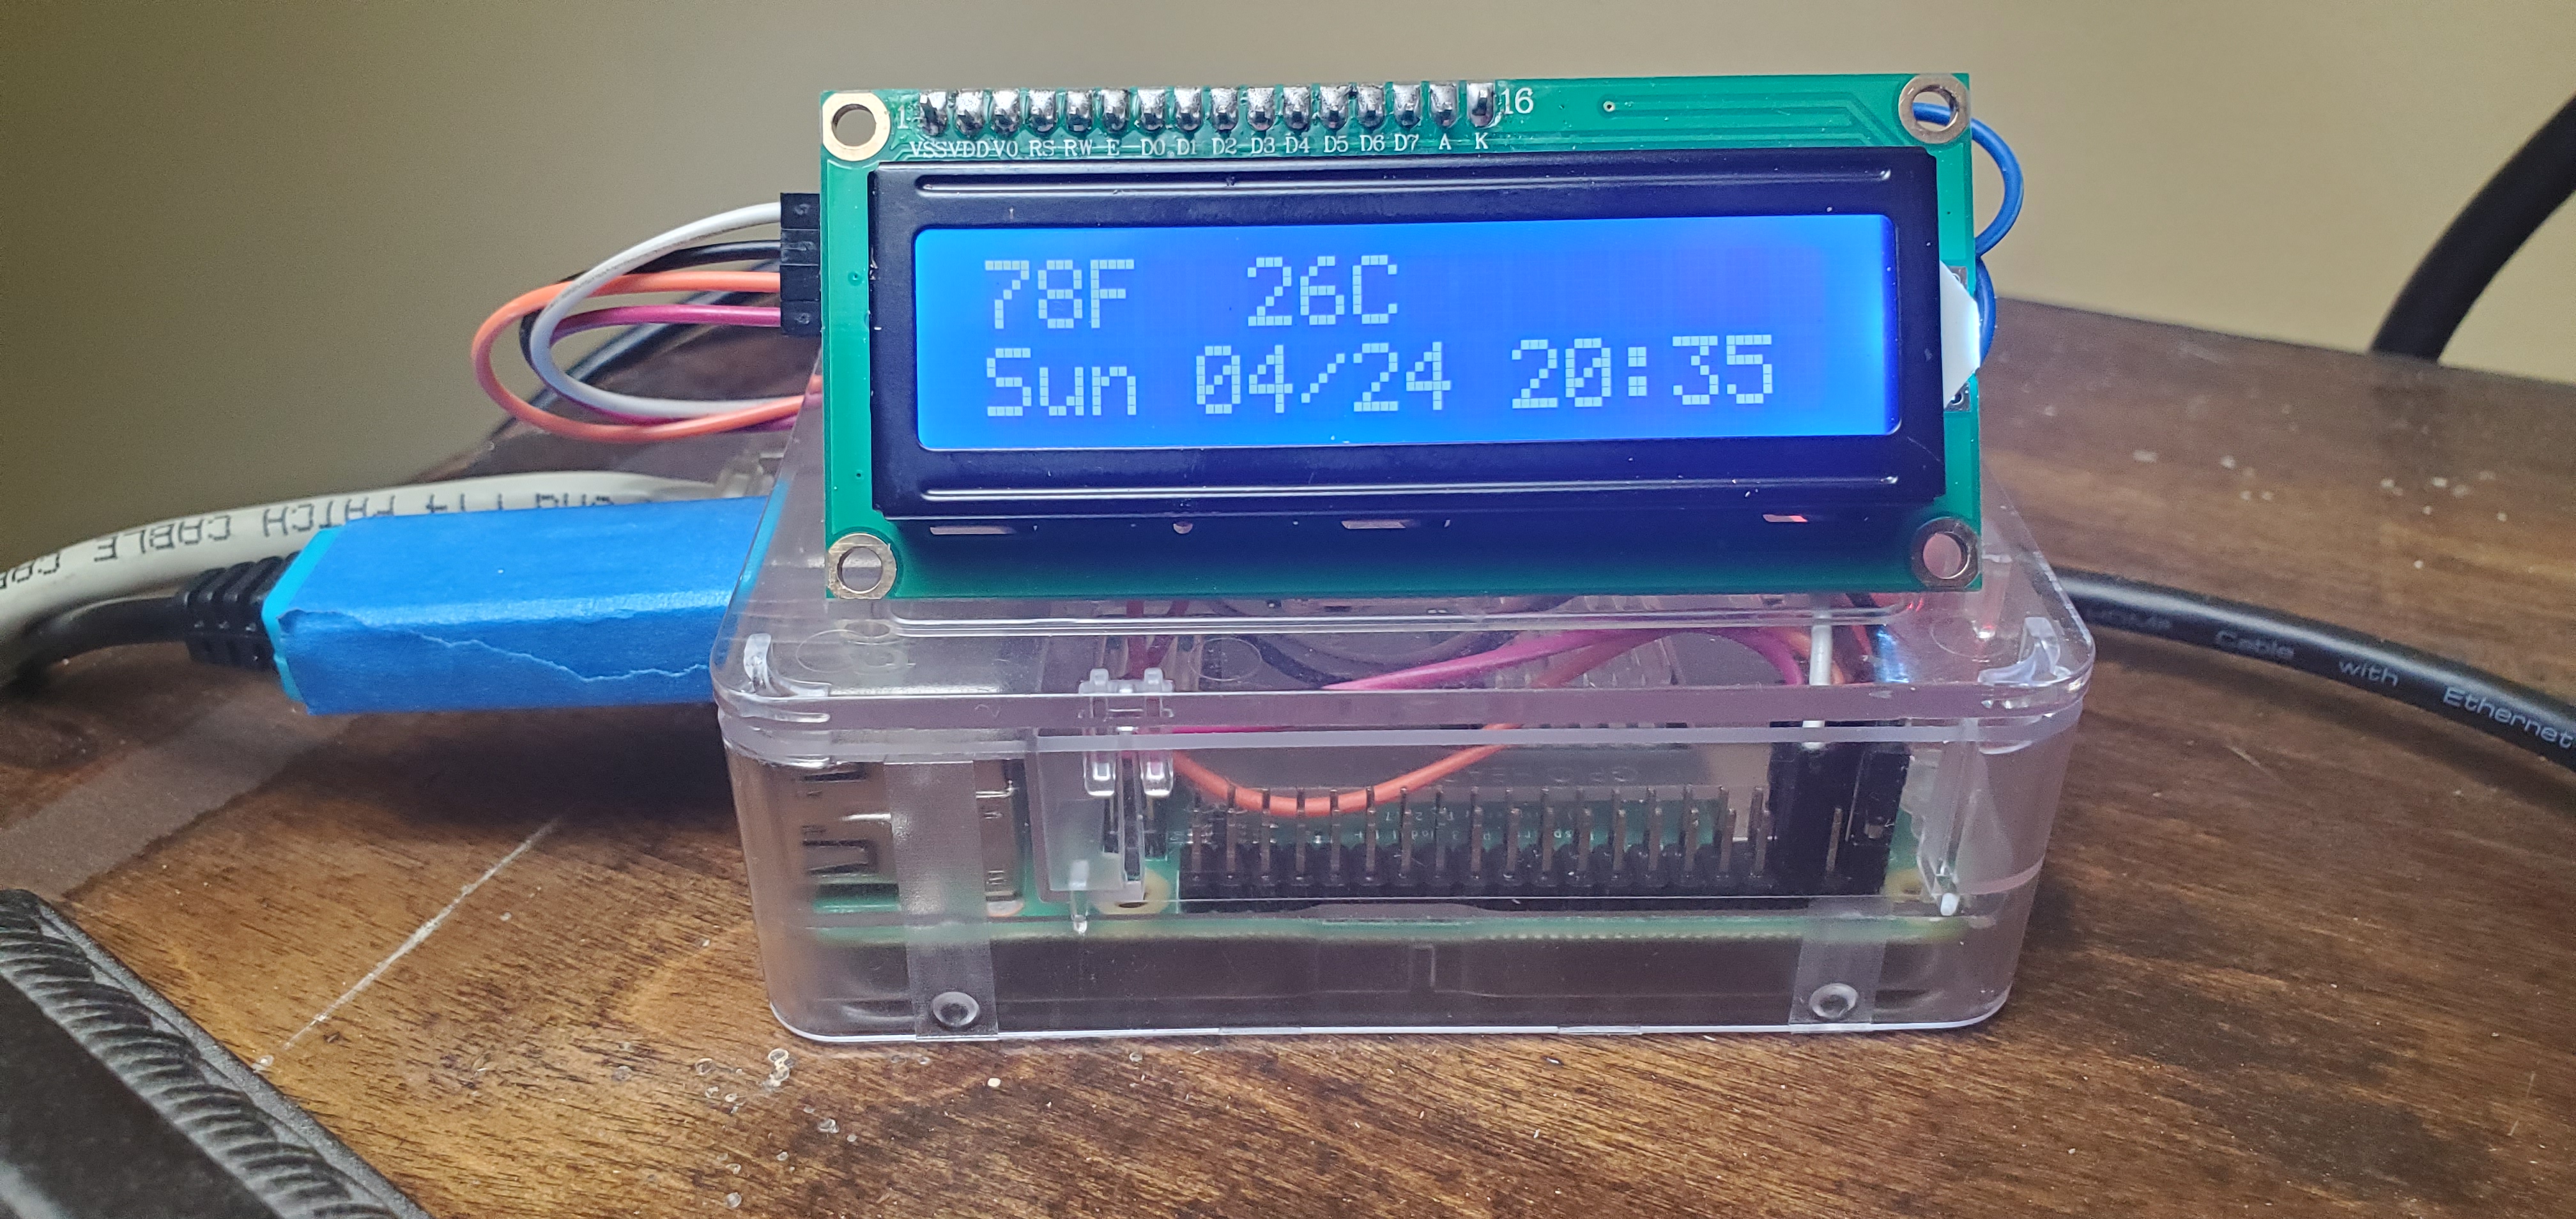 Themometer with Raspberry PI